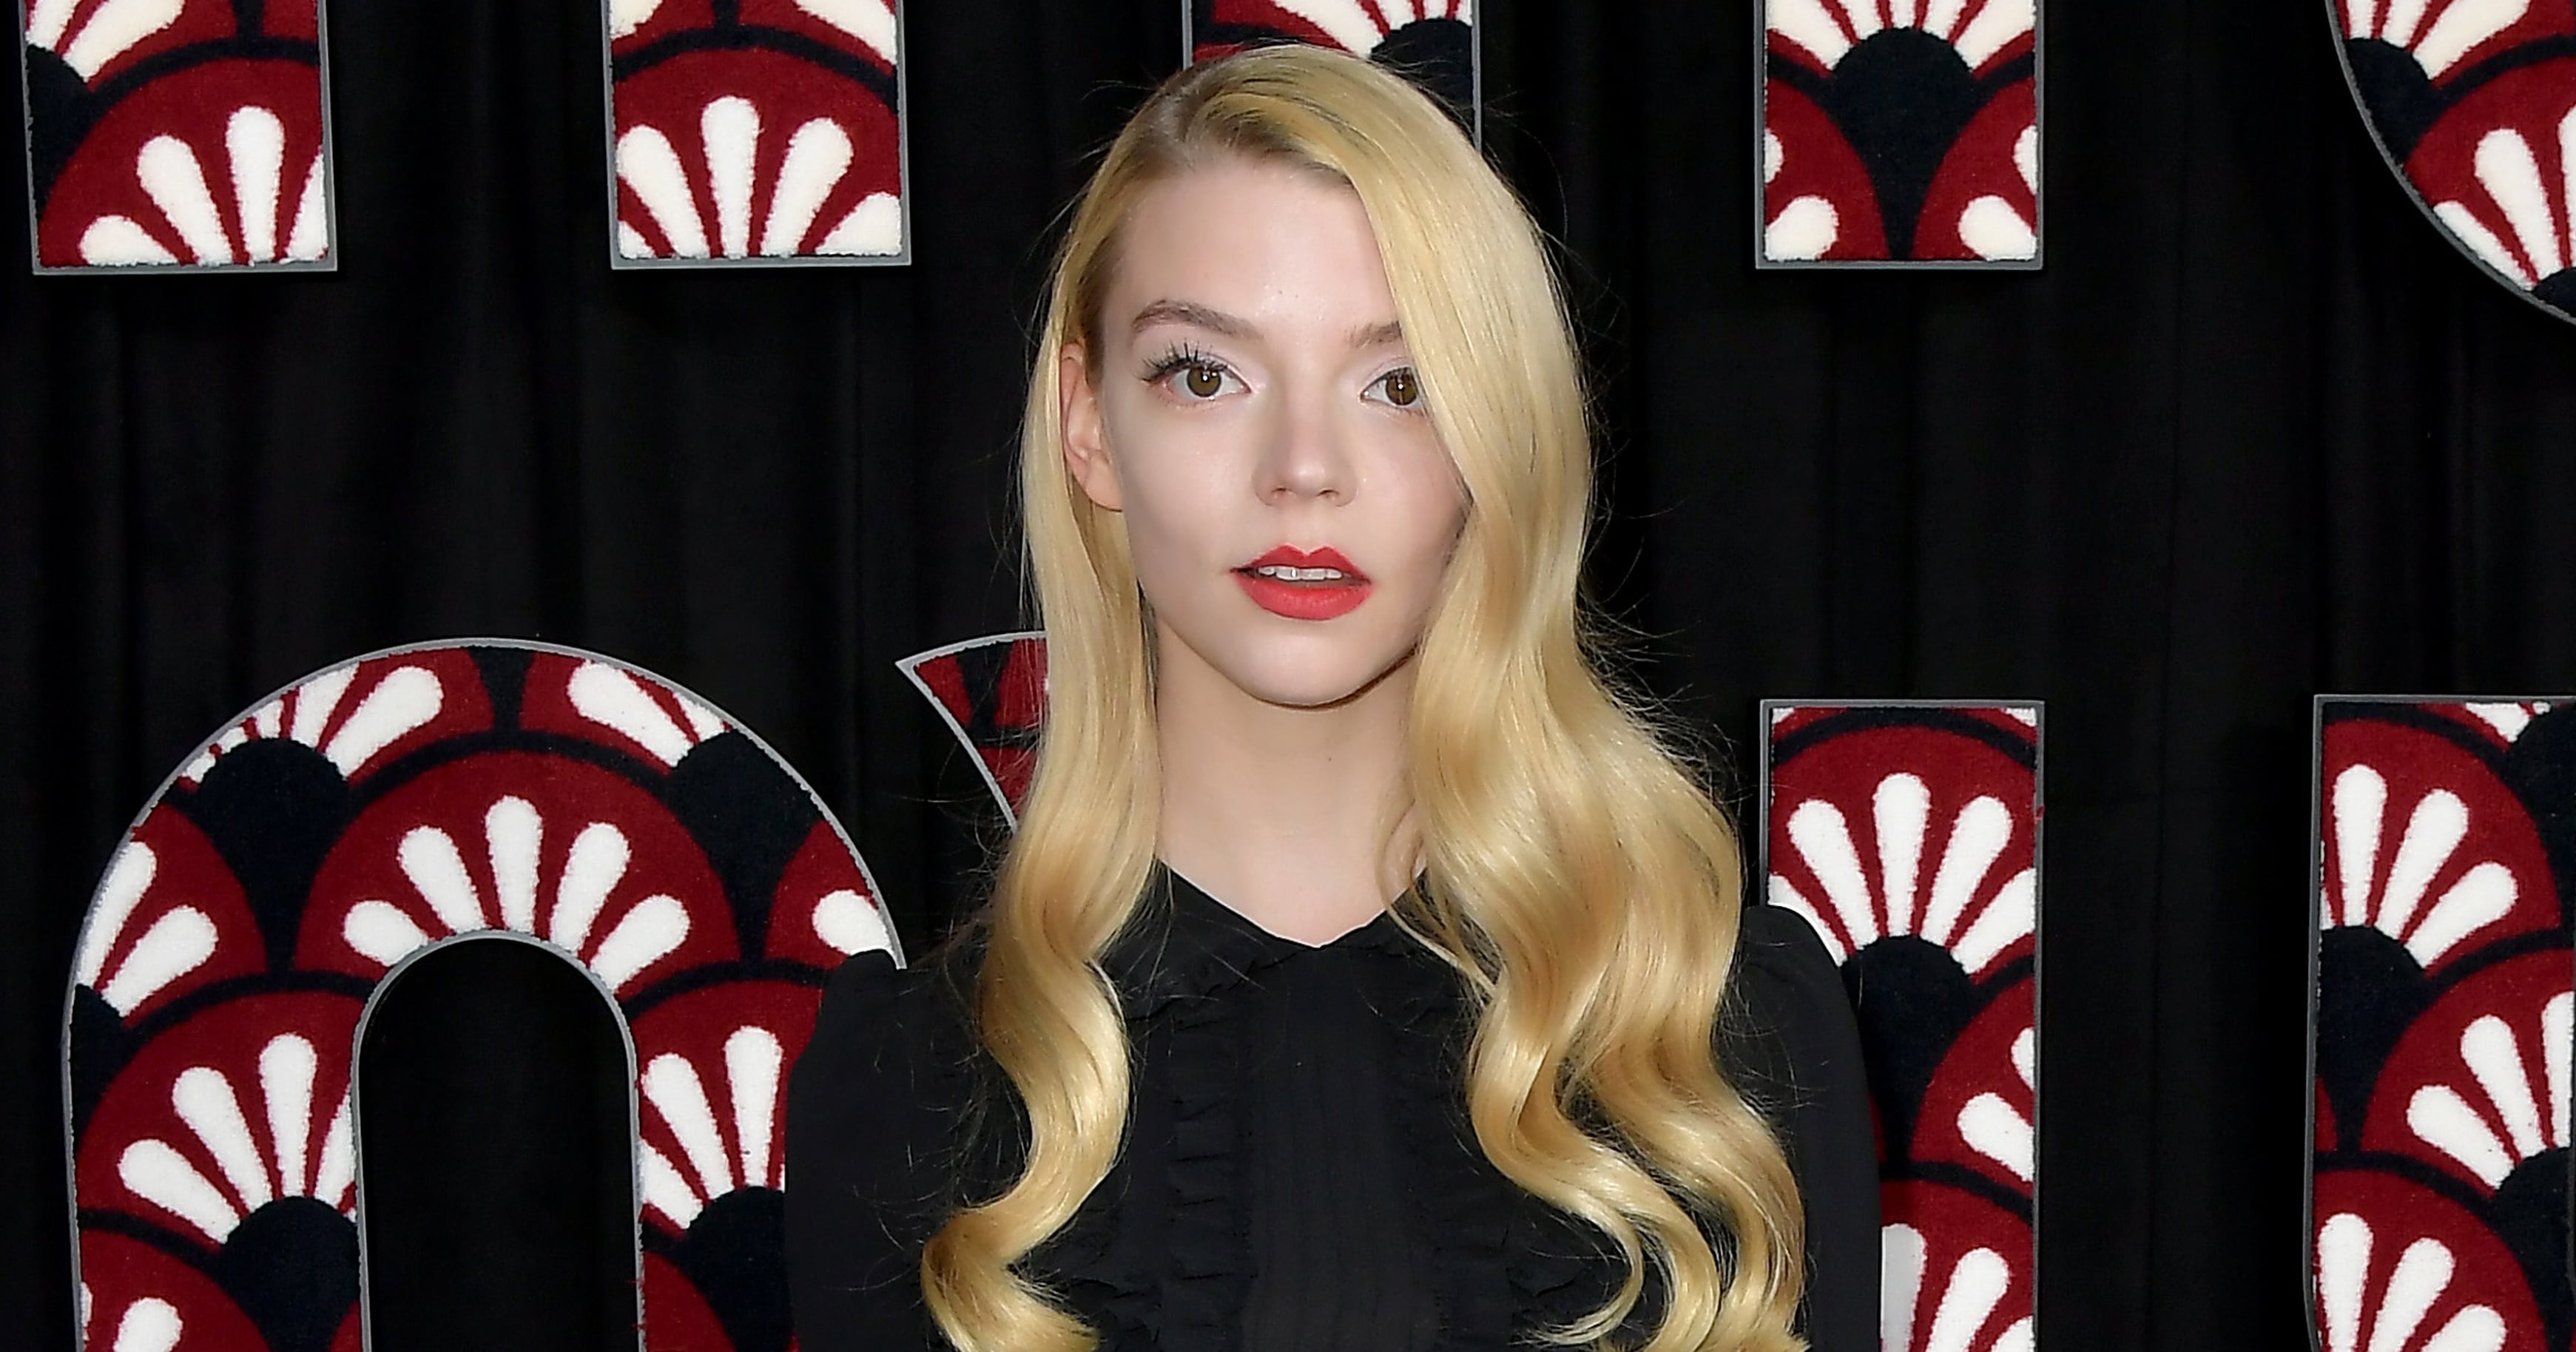 Anya Taylor-Joy: 19 facts about The Queen's Gambit actress you